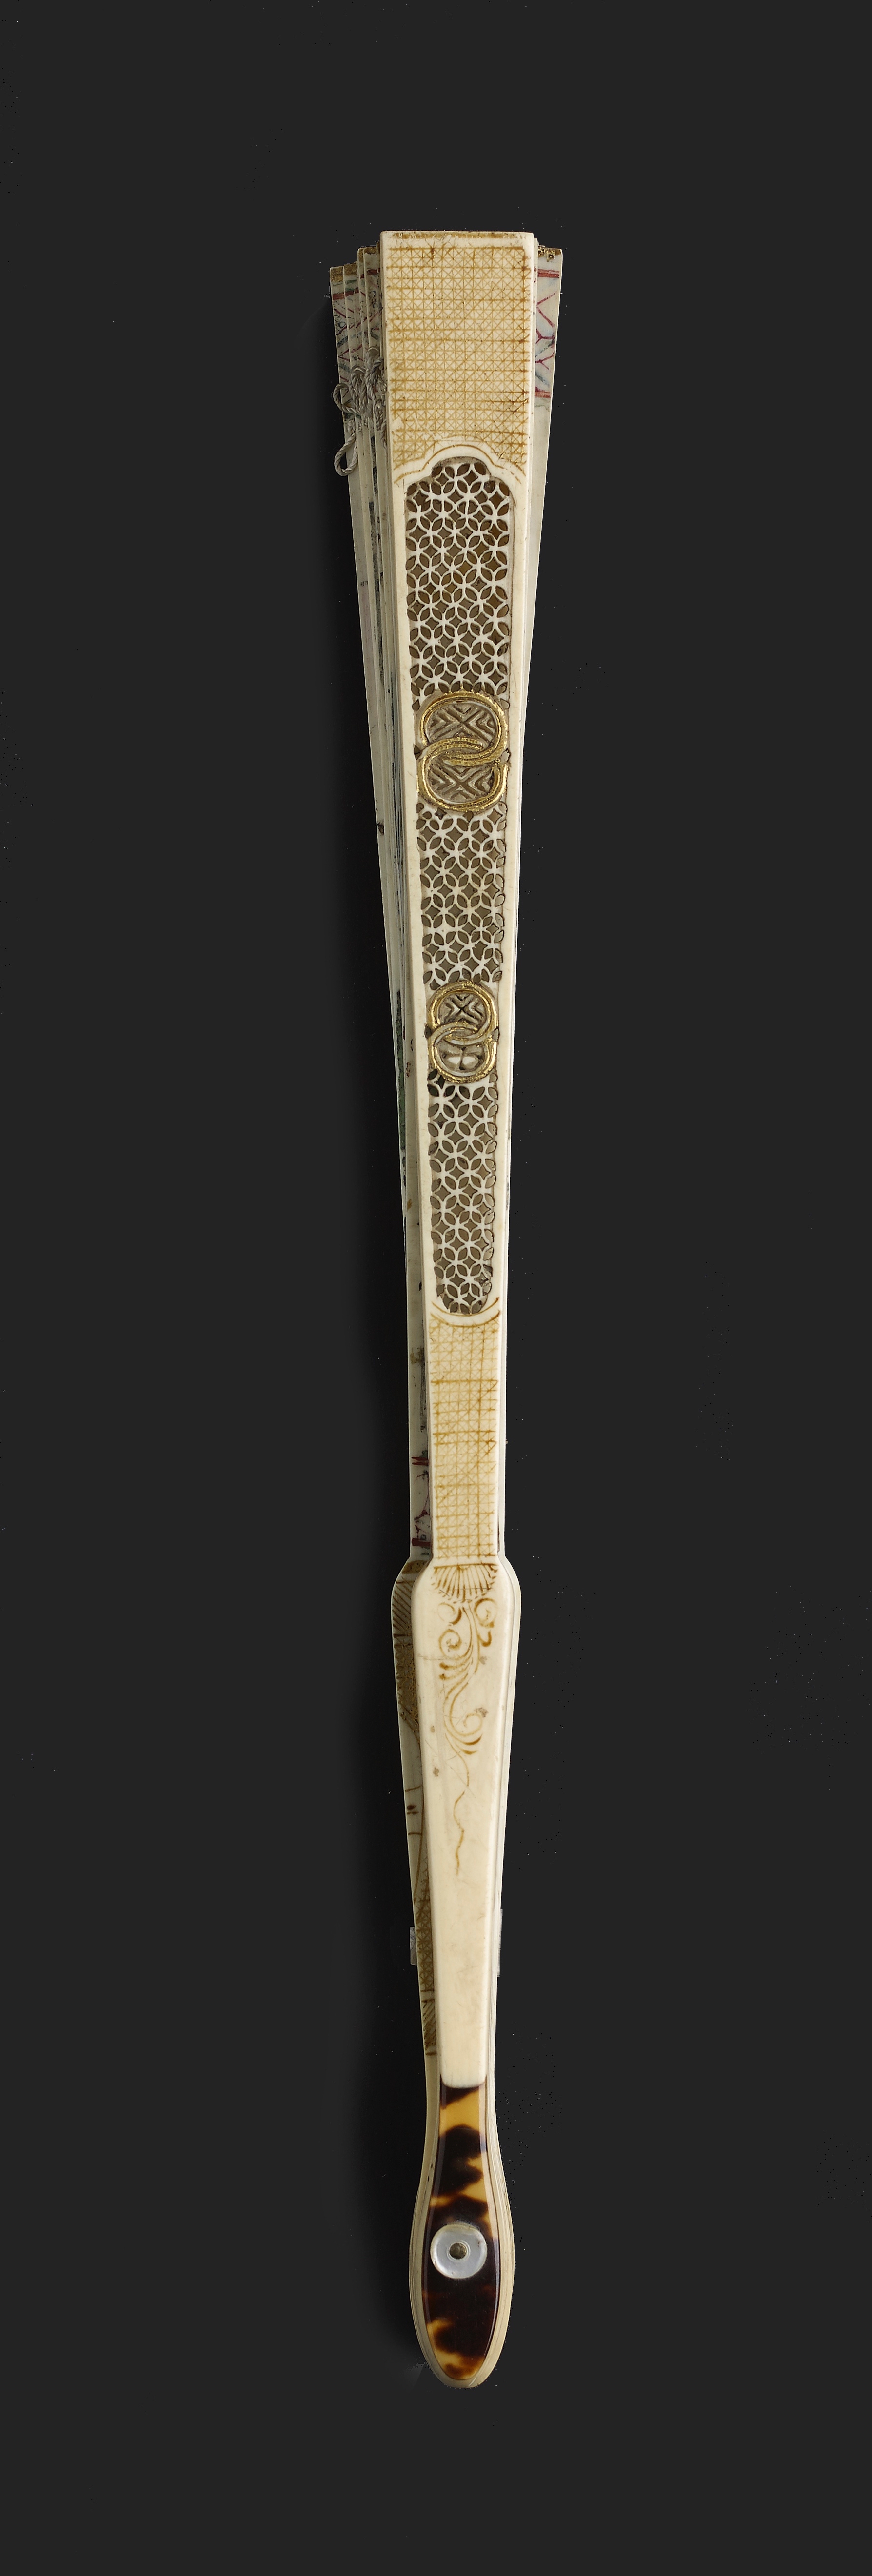 A CHINESE EXPORT CARVED AND PAINTED IVORY FAN, QING DYNASTY, KANGXI PERIOD, CIRCA 1710-22 - Image 3 of 3